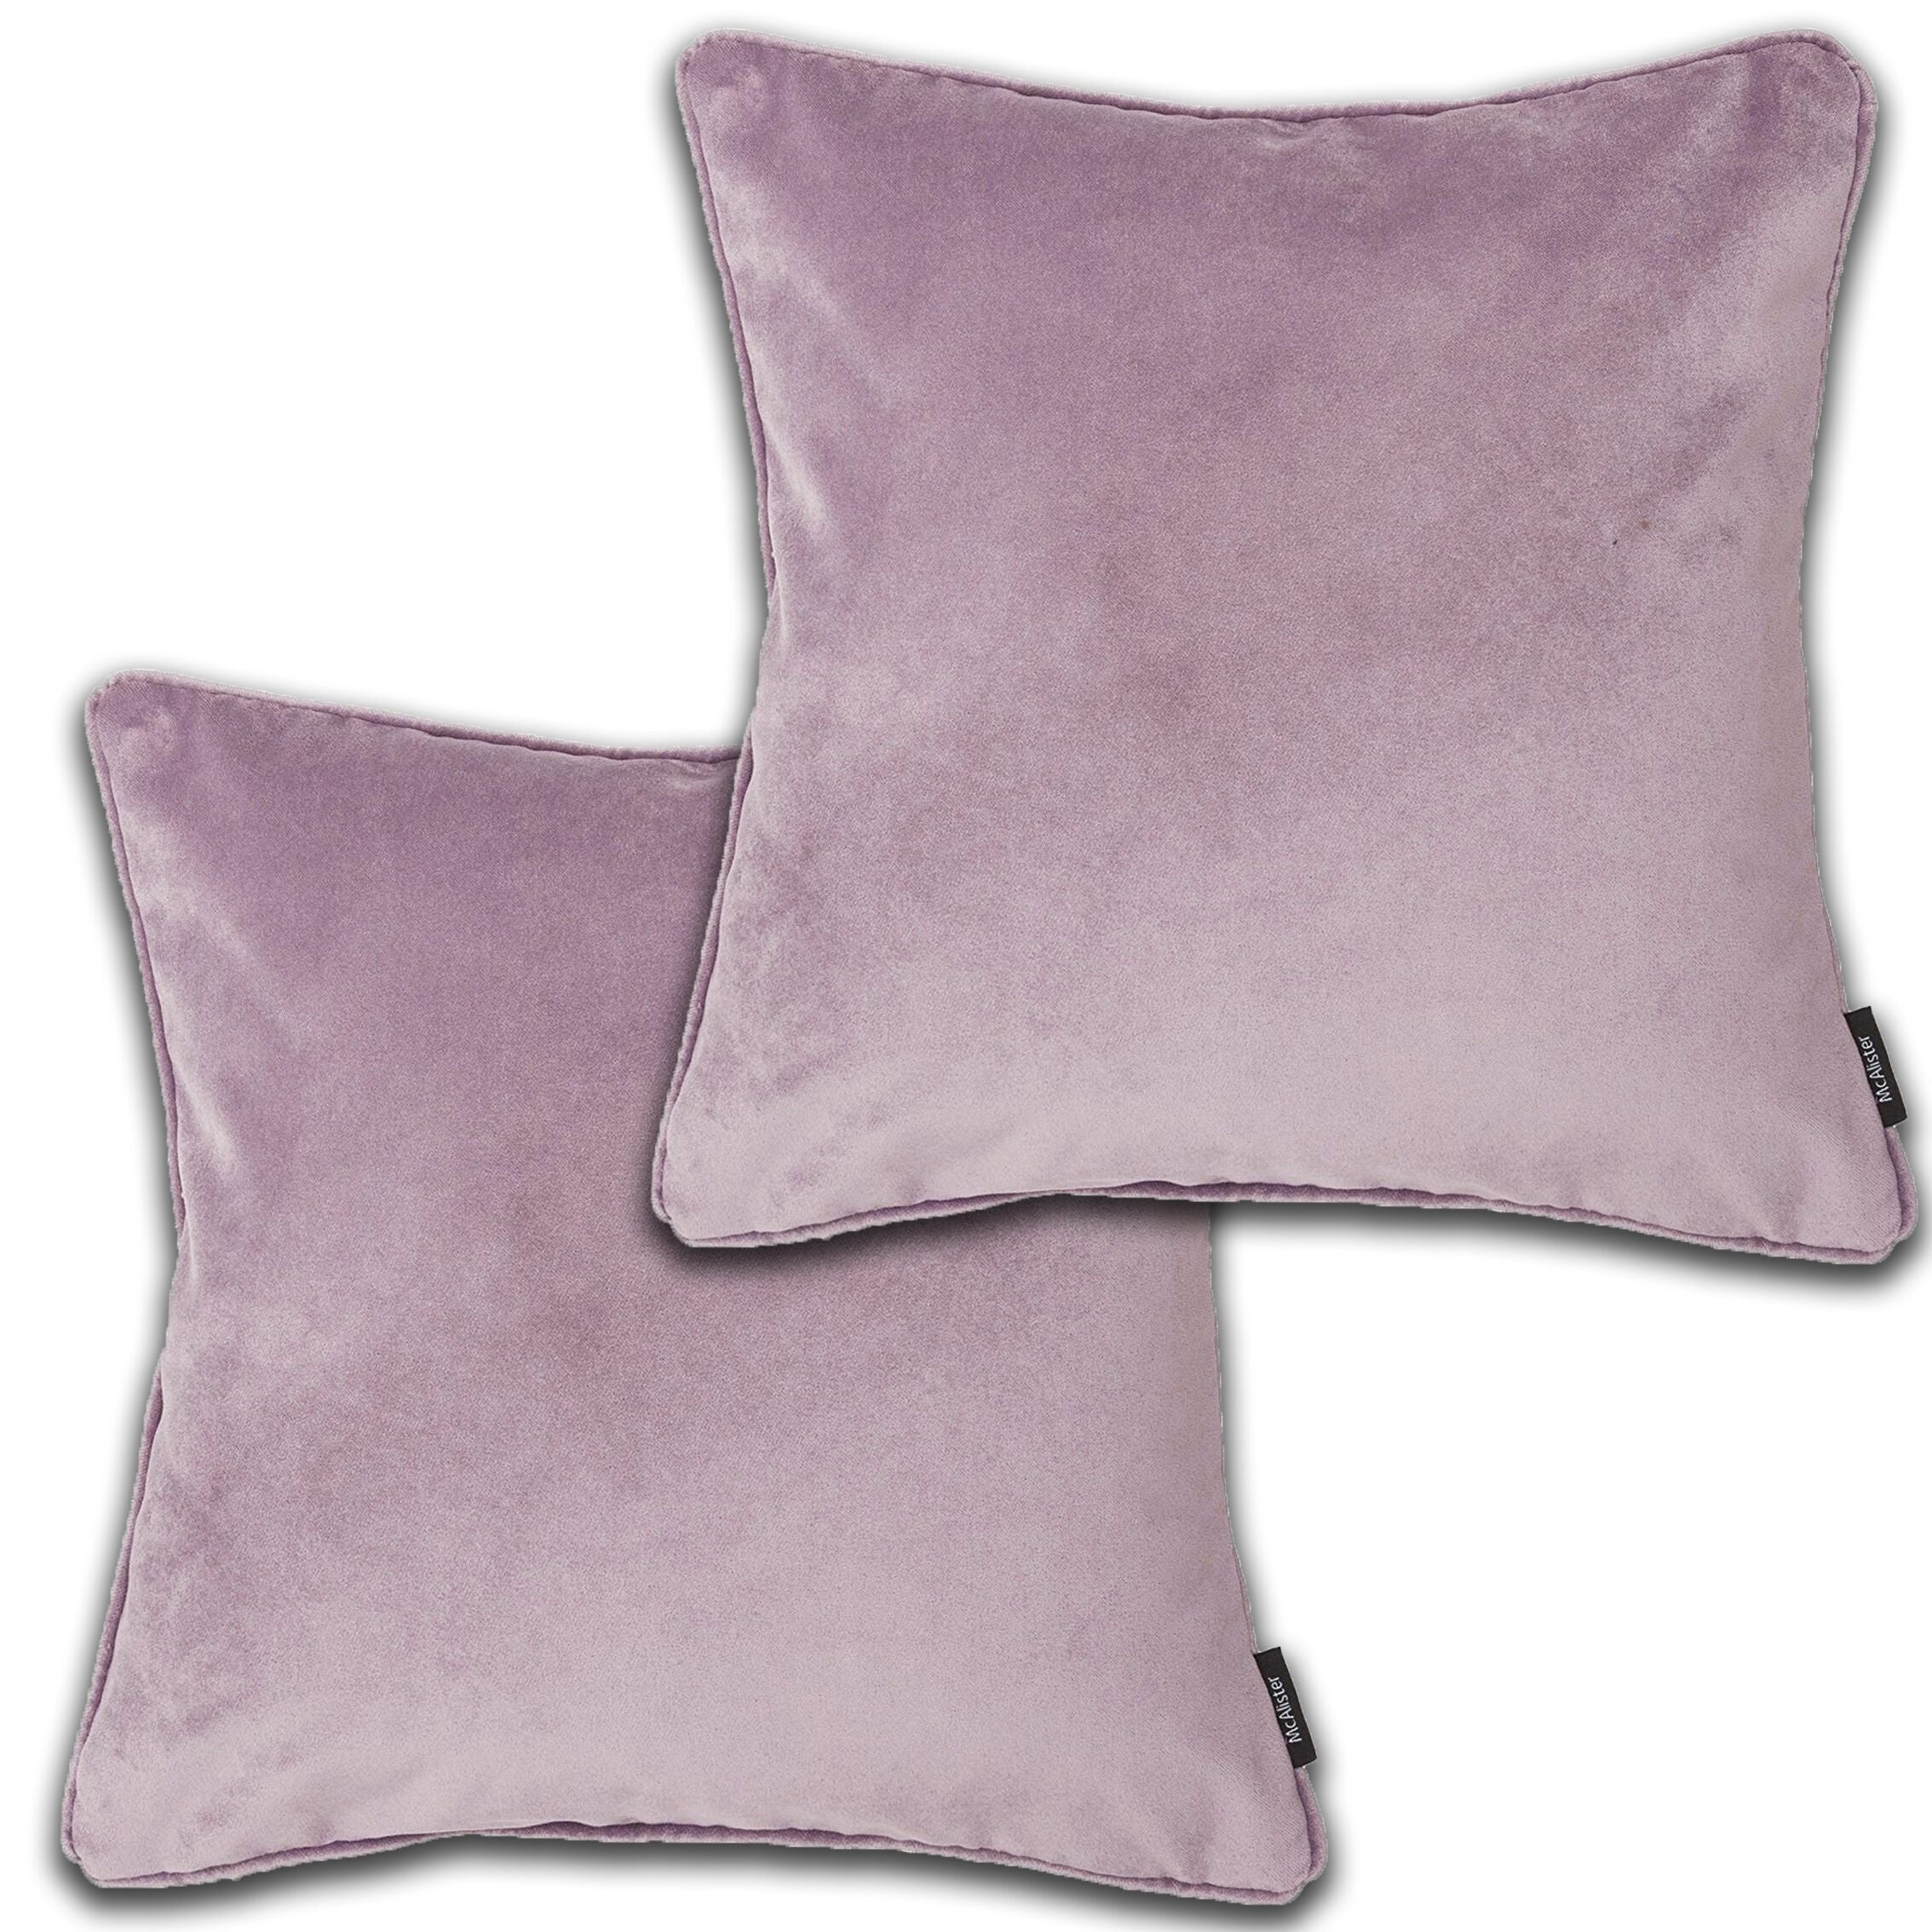 McAlister Textiles Matt Lilac Purple Velvet 43cm x 43cm Piped Cushion Sets Cushions and Covers Cushion Covers Set of 2 